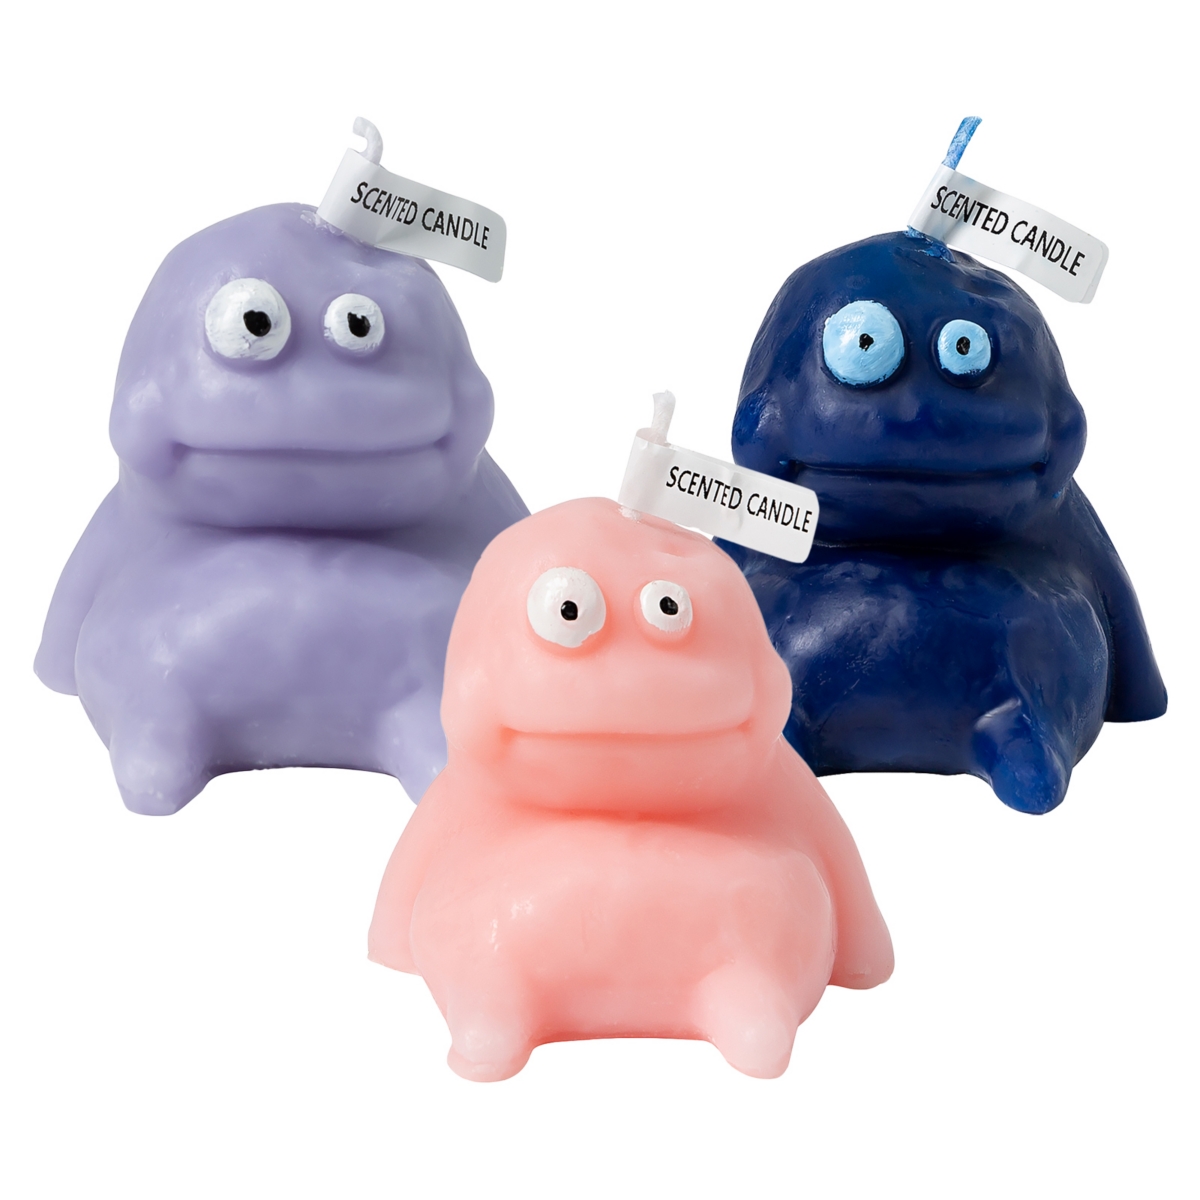 Mudman Shaped Scented Candle, 3.3" Fat Mud Monster Soy Wax Candle with Fragrance - Set of 3 - Pink/Purple/Blue